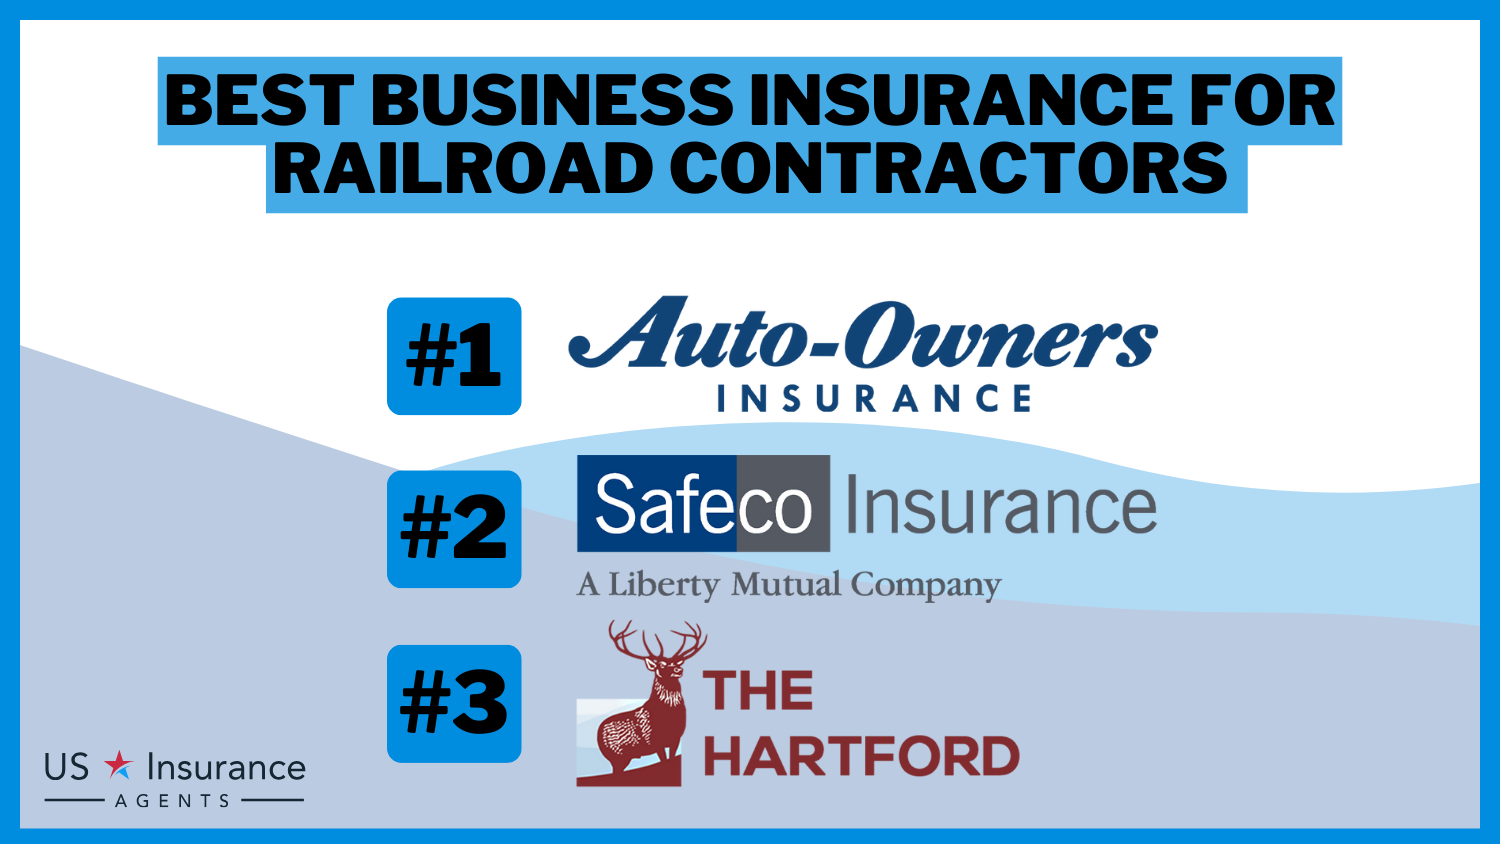 Auto-Owners, Safeco, The Hartford: Best Business Insurance for Railroad Contractors